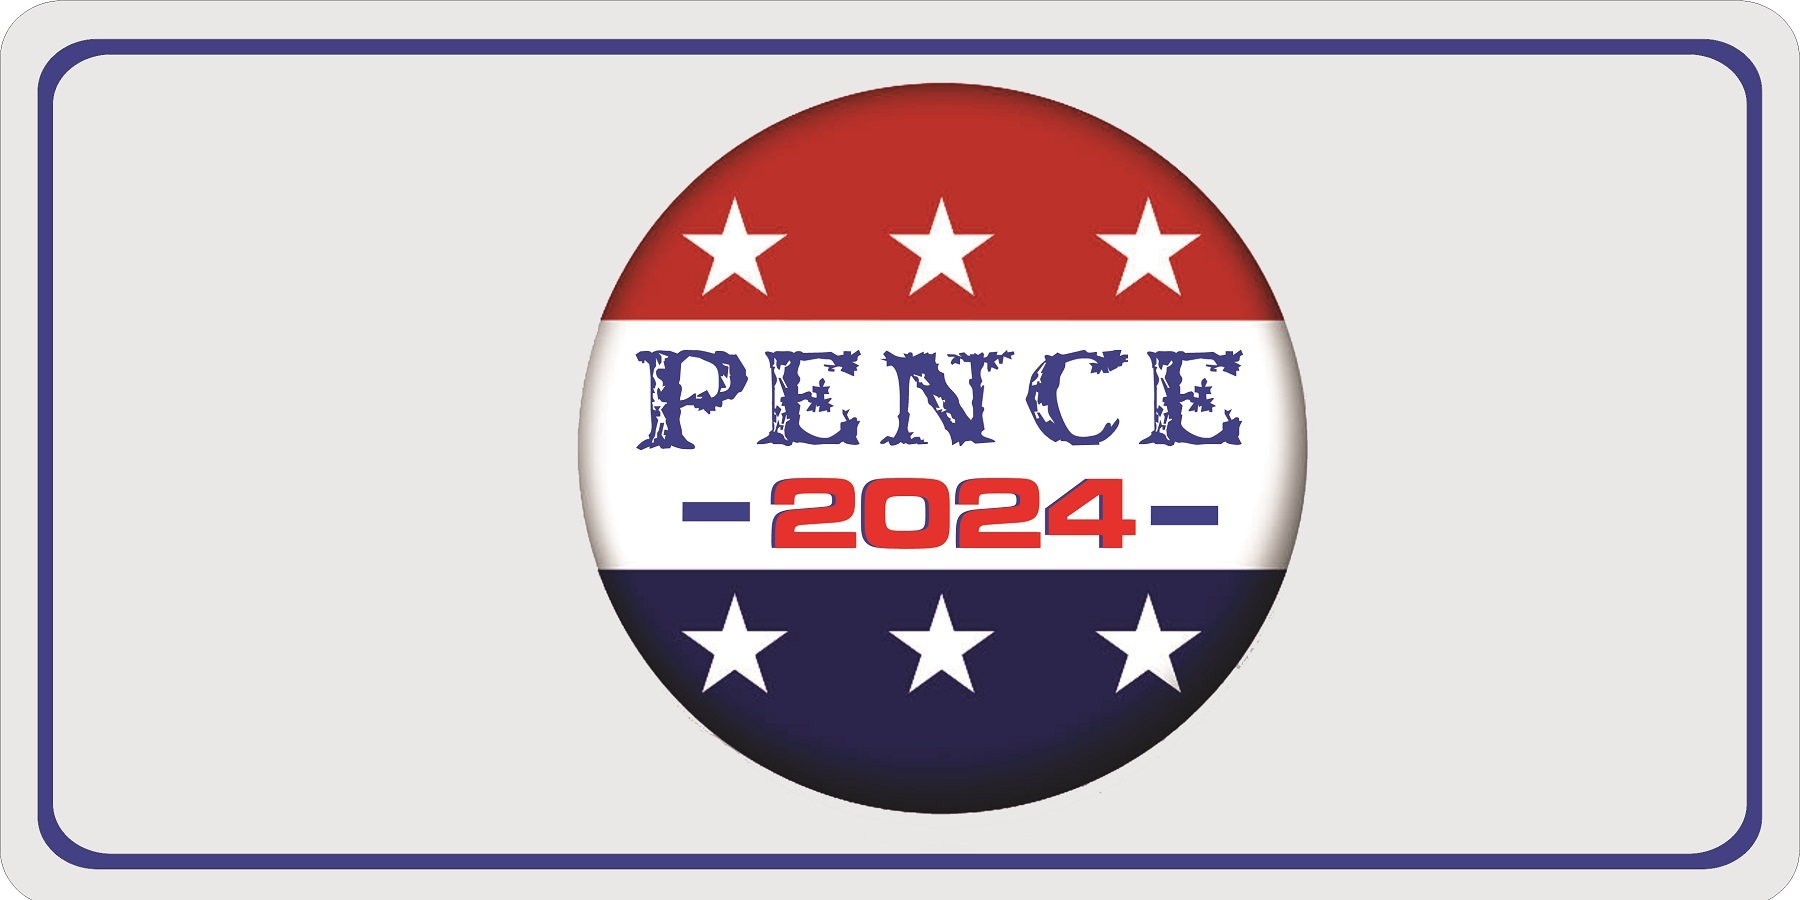 Pence 2024 Button Photo LICENSE PLATE